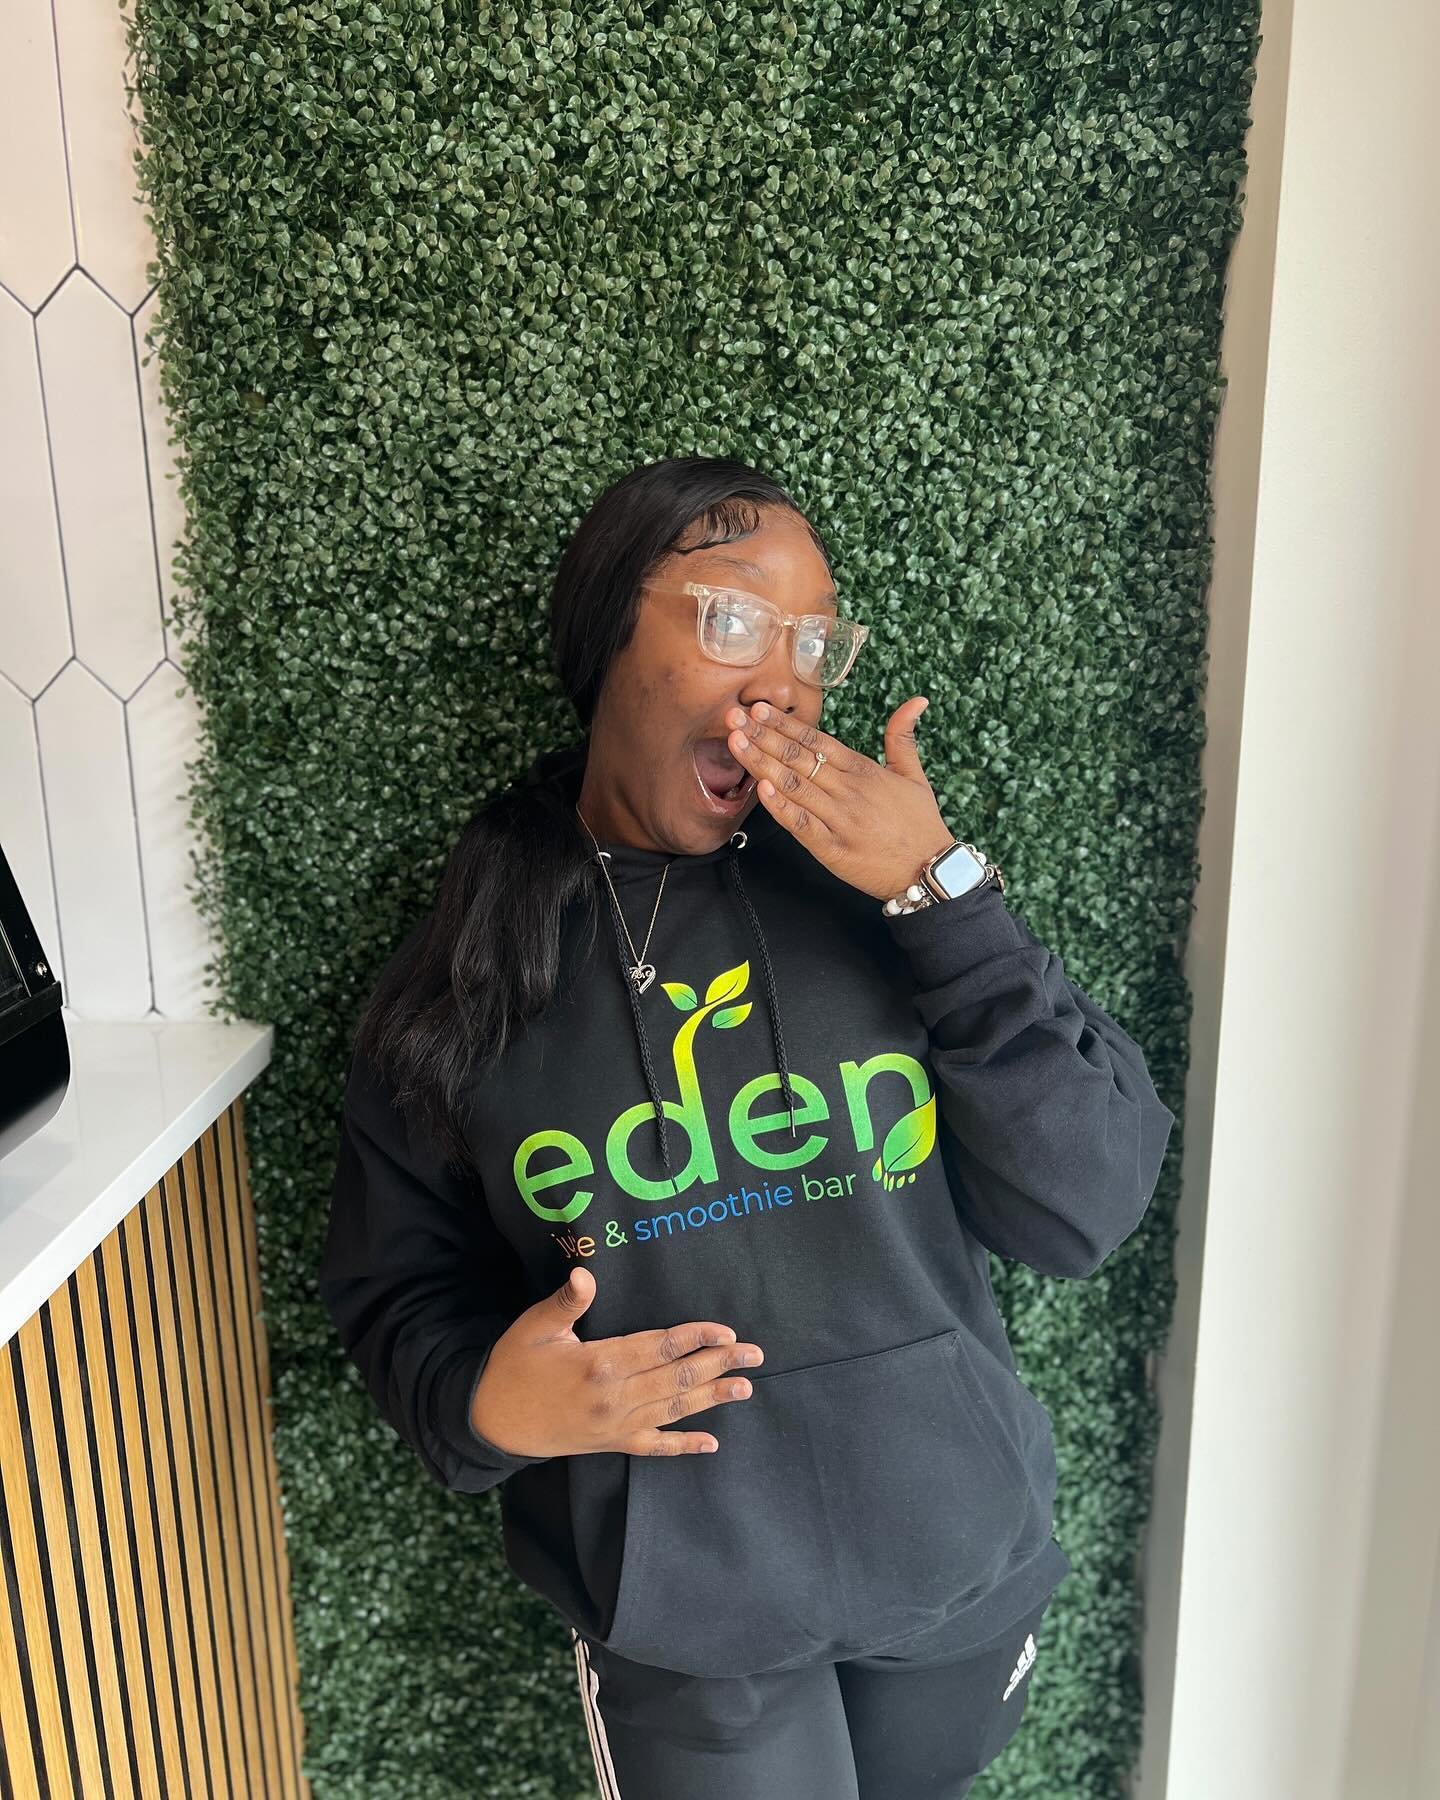 🥳 Today, we&rsquo;re celebrating the bright light and infectious energy of our very own Destinee! 🎉🎂 

Wishing you the happiest of birthdays filled with joy, laughter, and all your heart desires. Eden wouldn&rsquo;t be the same without your positi